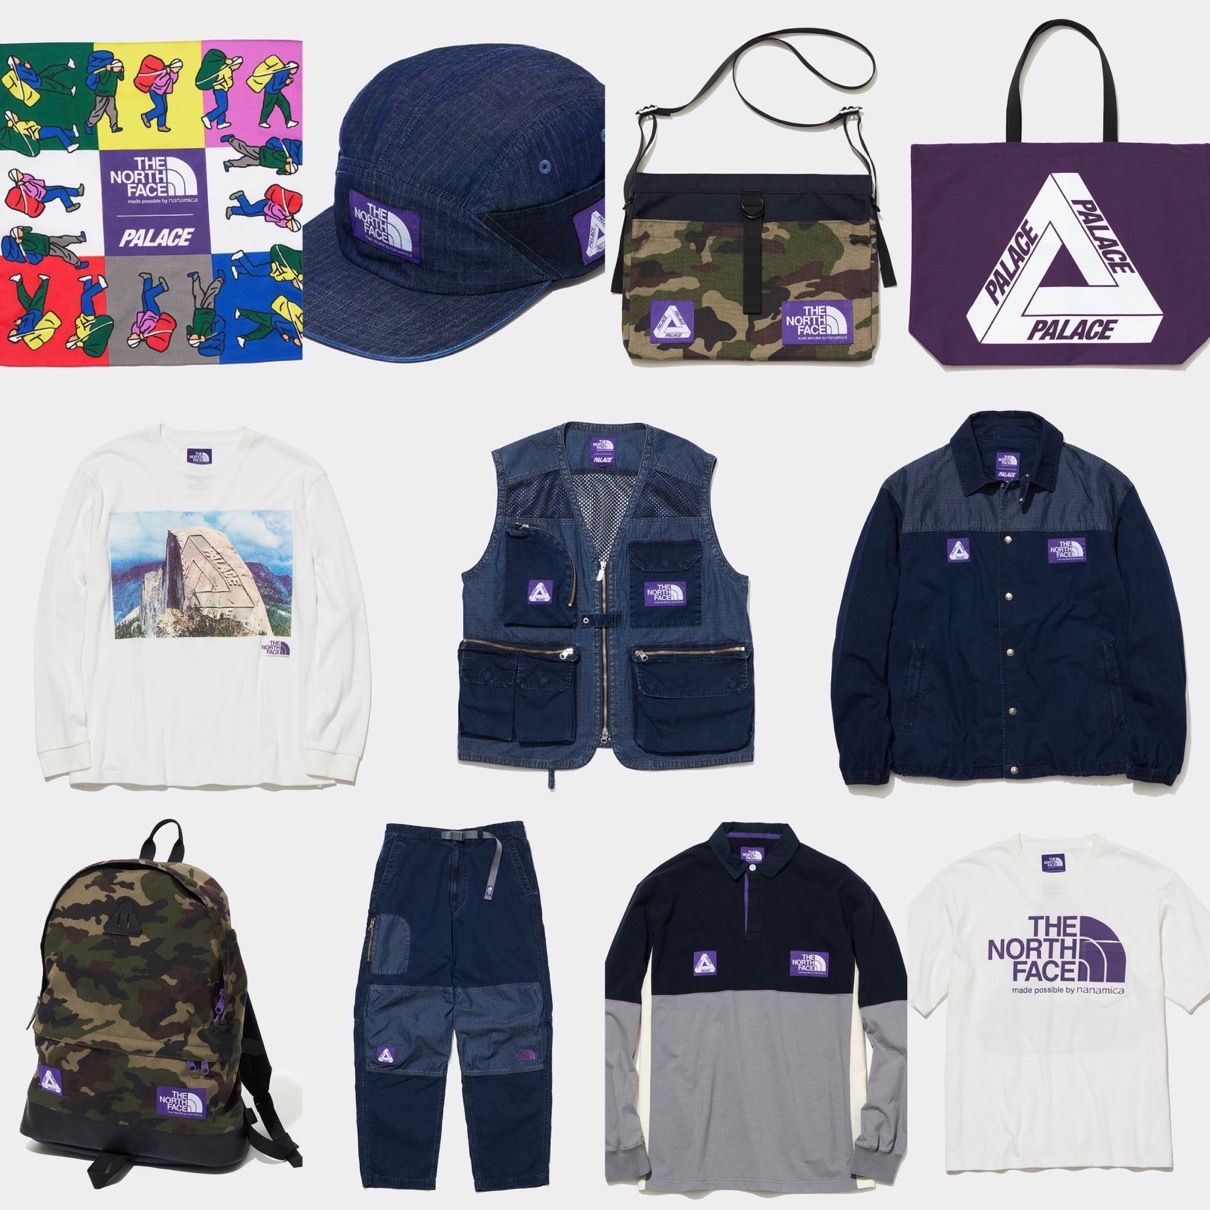 THE NORTH FACE Purple Label × PALACE SKATEBOARDS】コラボコレクションが国内3月27日に発売予定 |  UP TO DATE